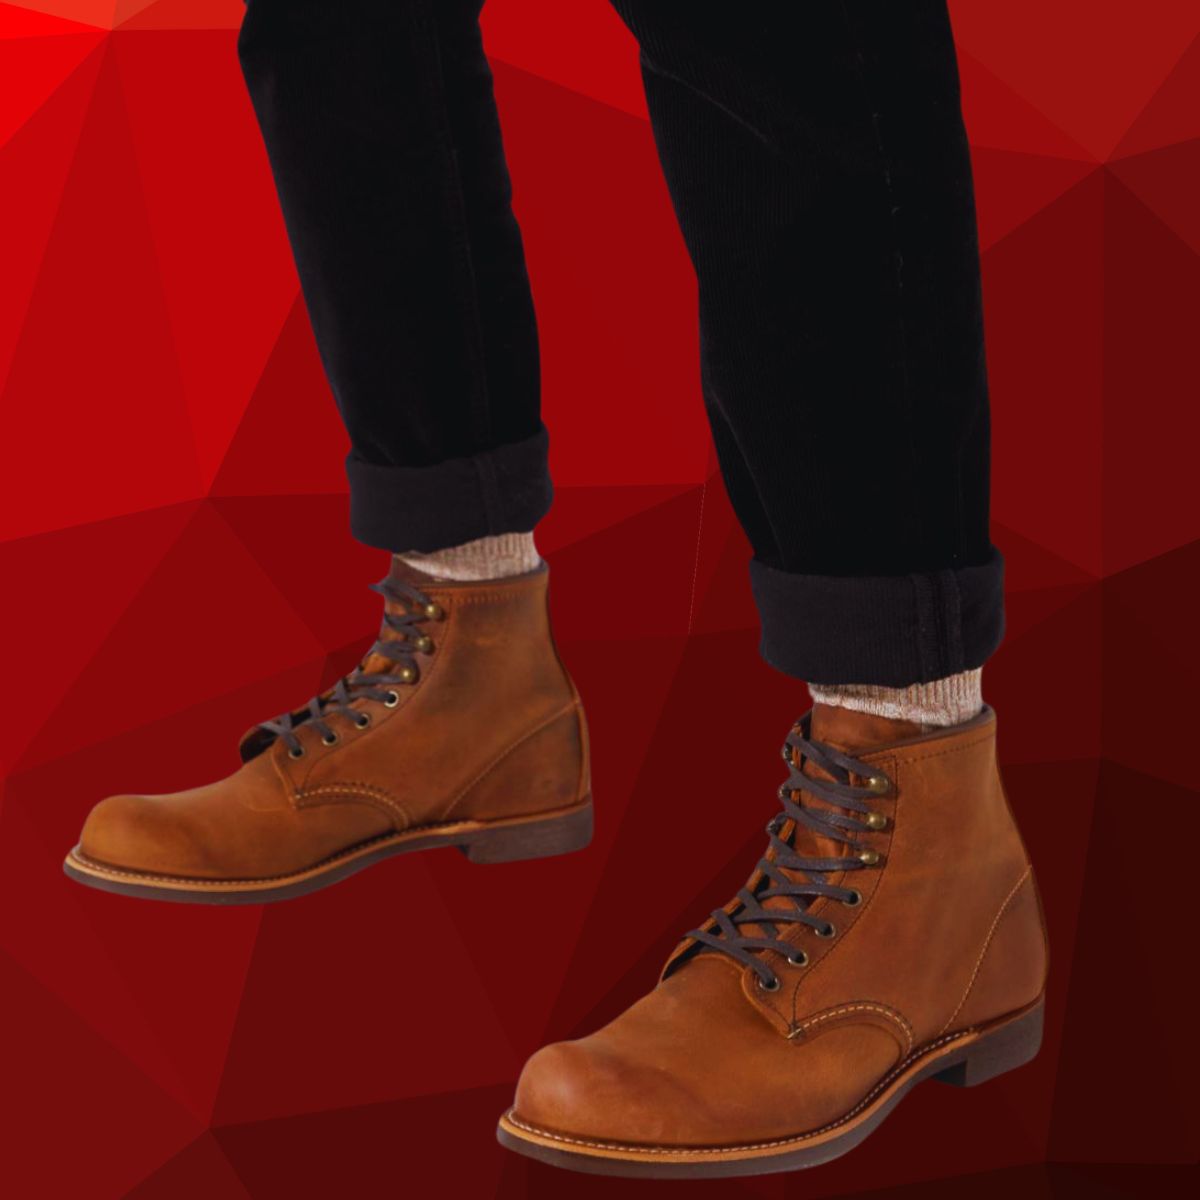 Red Wings Blacksmiths boots Styles Versatility and Individuality